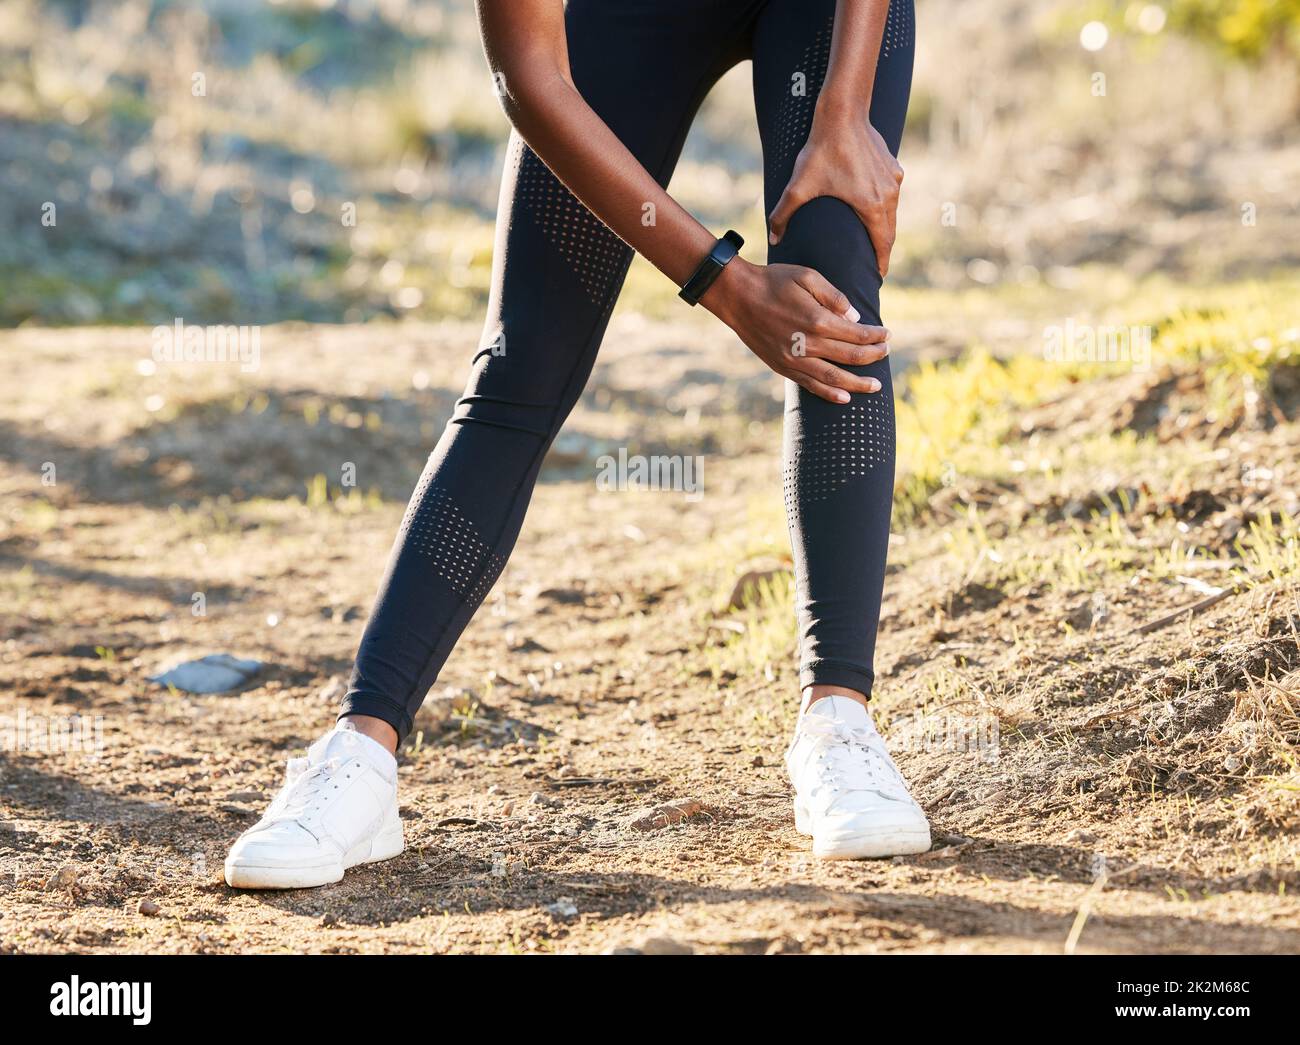 Stretch past the pain. Shot of a woman experiencing knee pain while working out in nature. Stock Photo